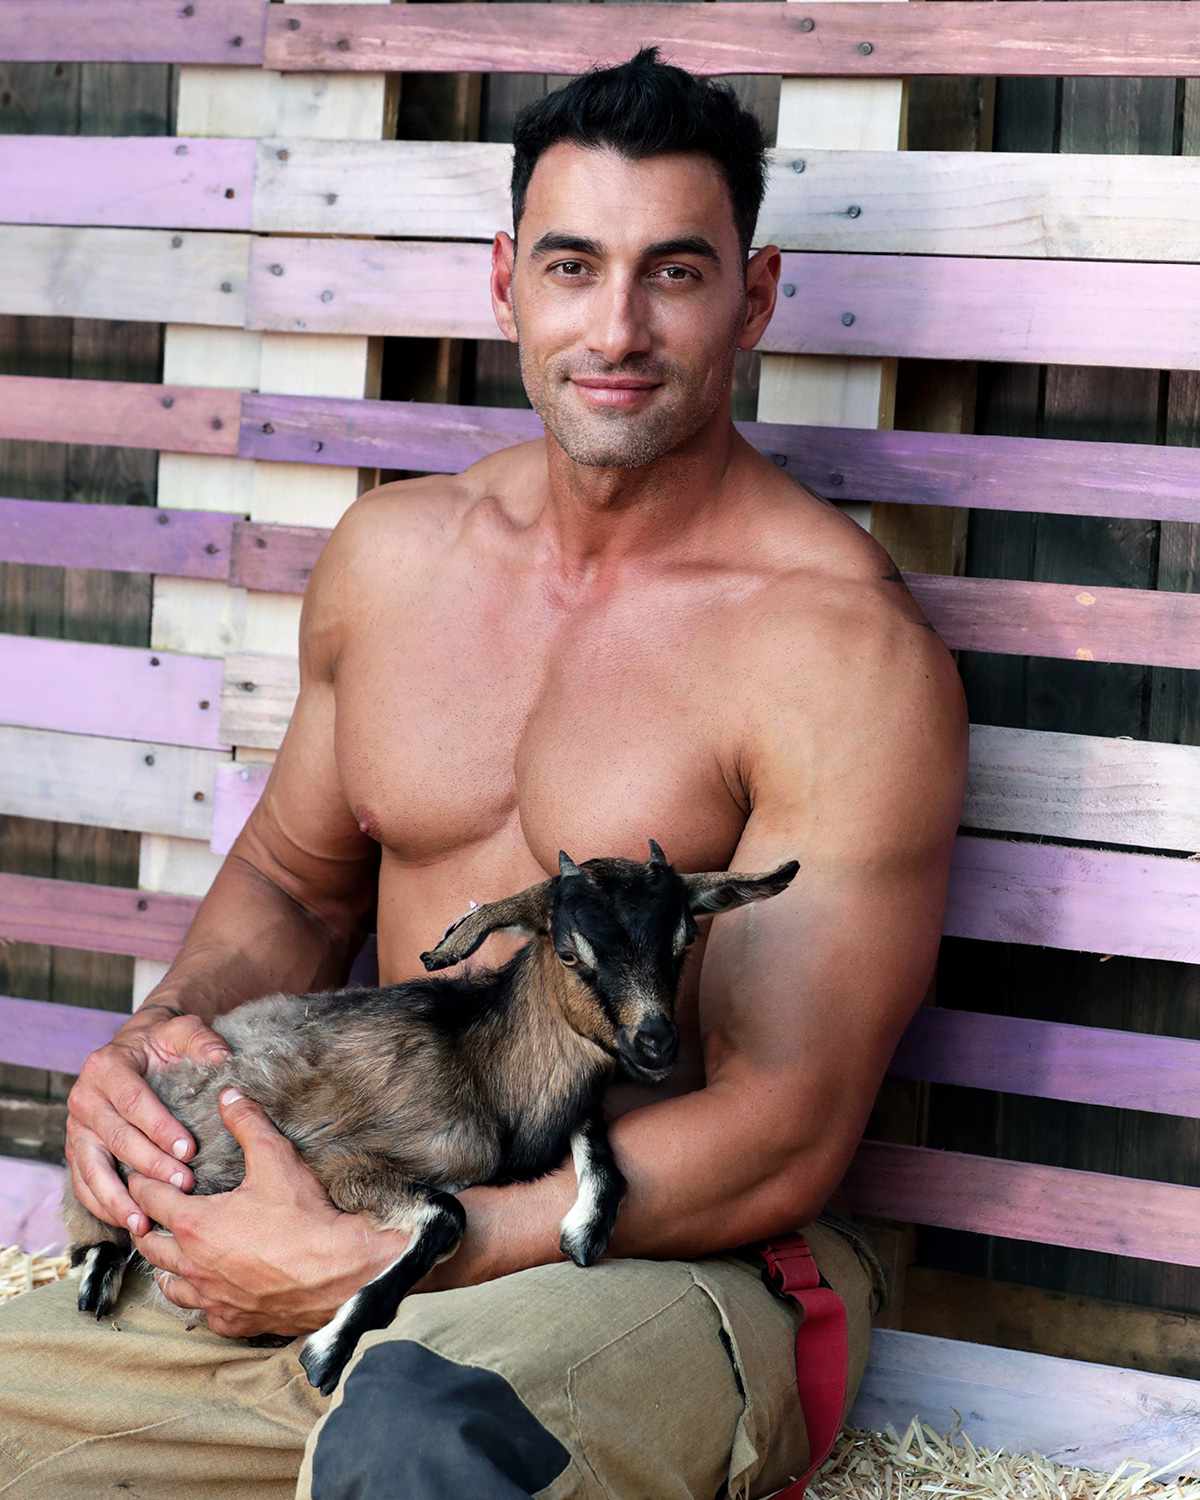 Australian Firefight Calendars are back with animals